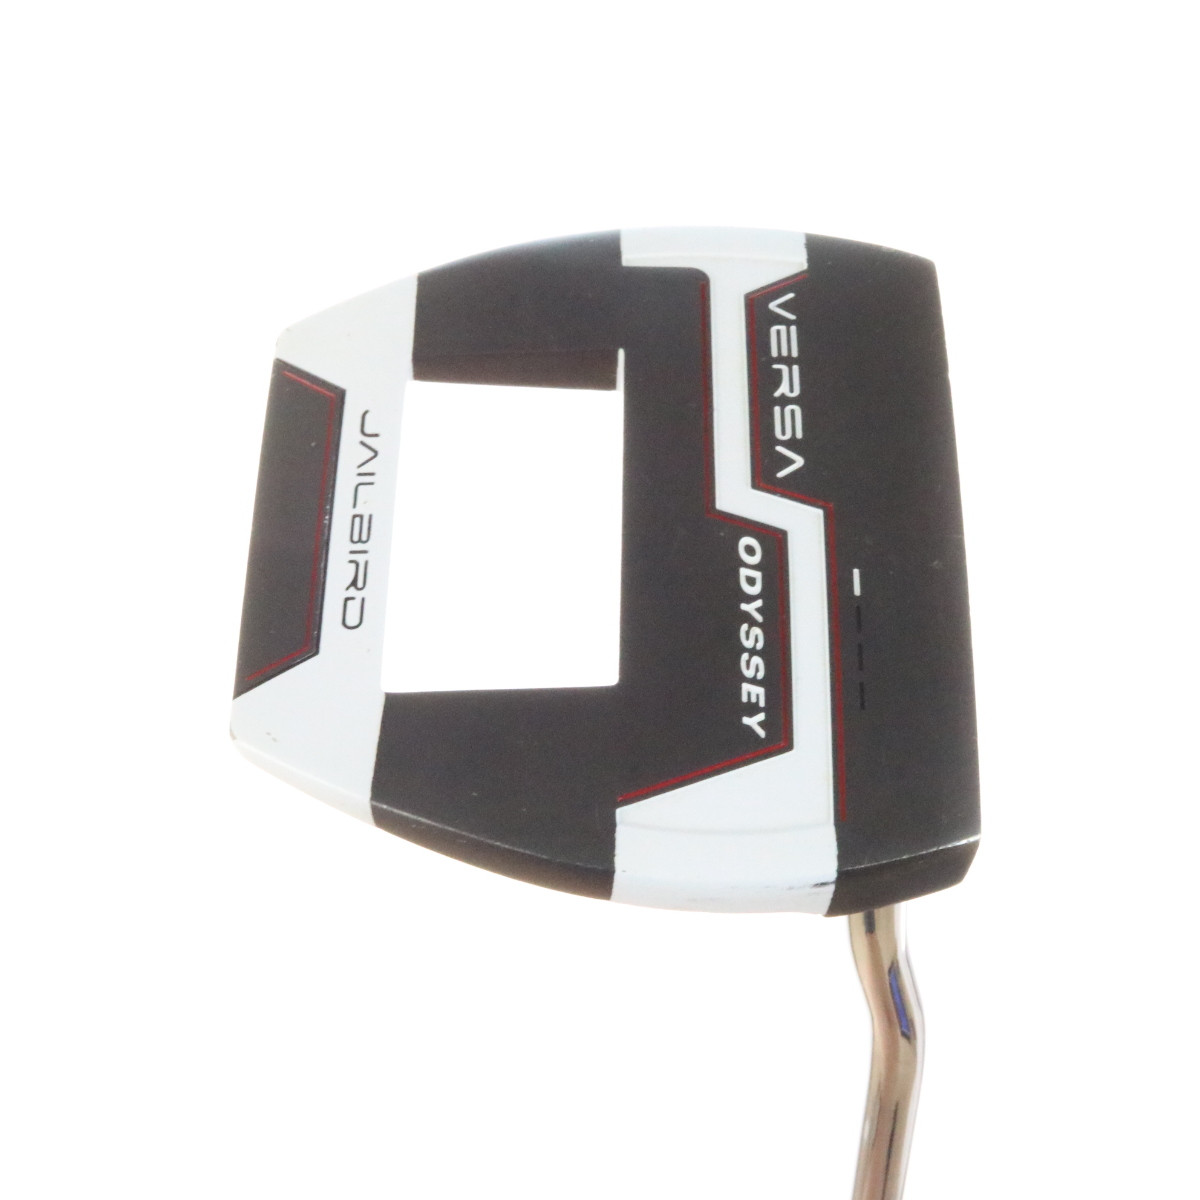 Odyssey Versa Jailbird Putter 34 Inches Right-Handed 46029A - Mr Topes Golf